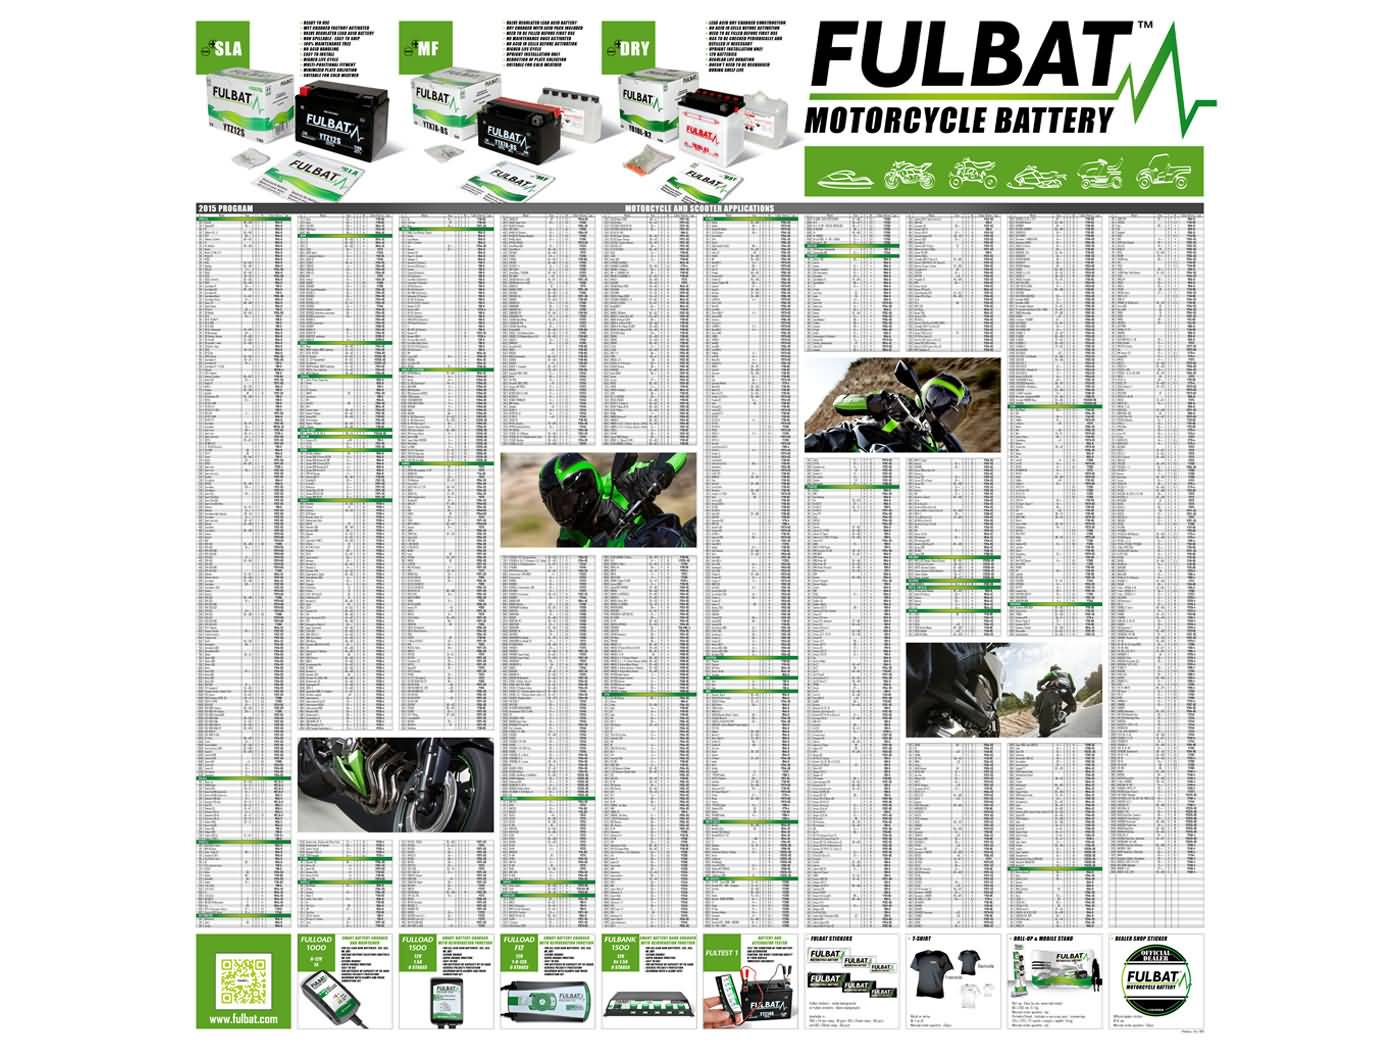 Poster Fulbat Accufinder